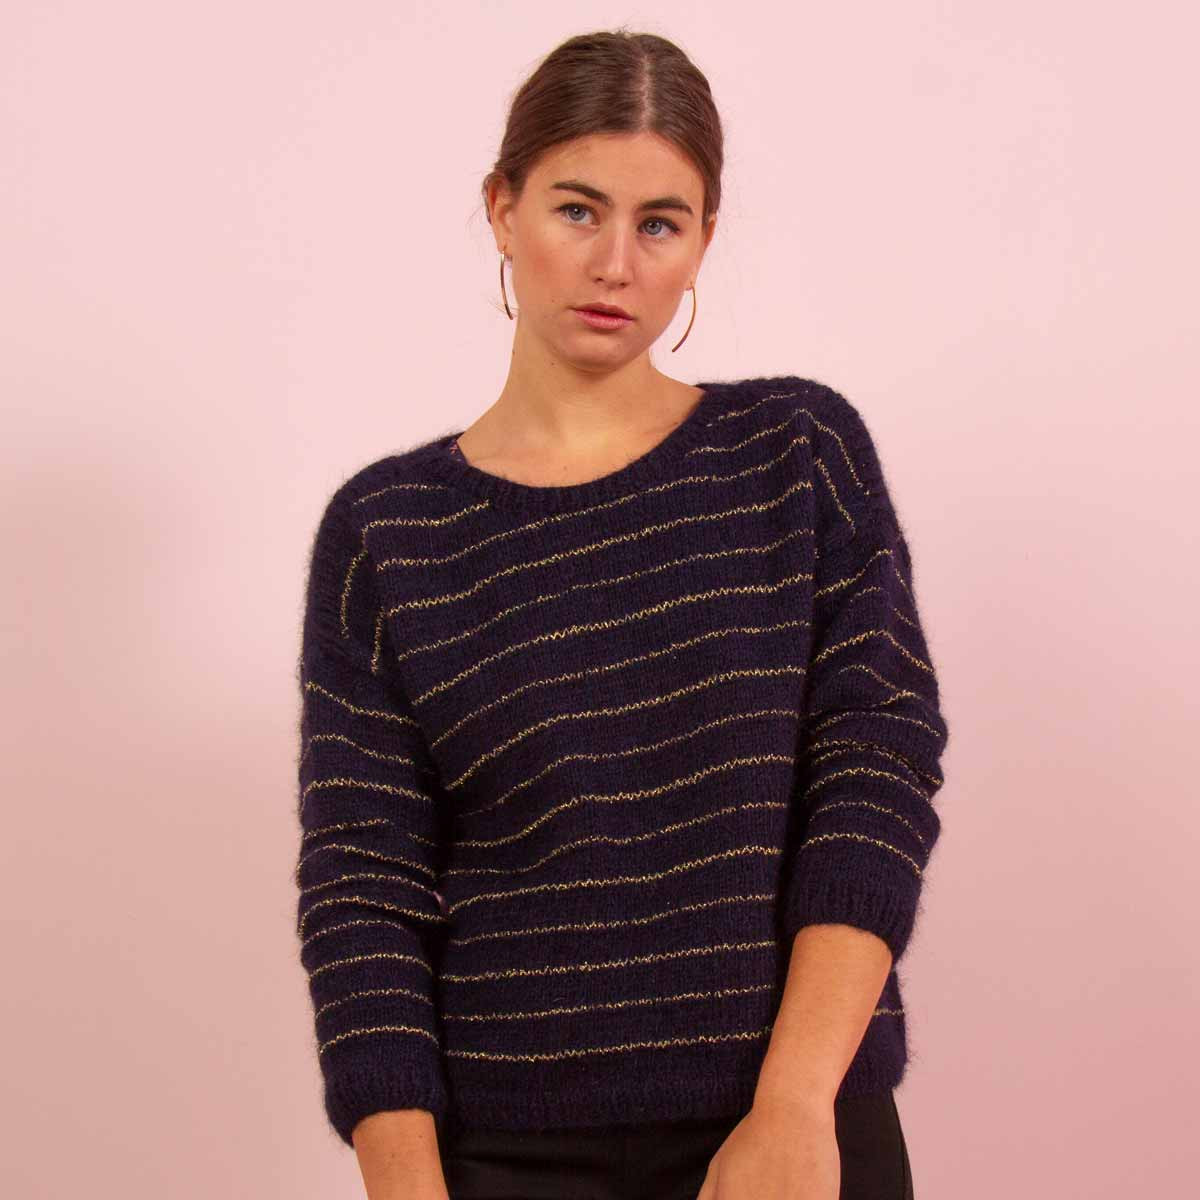 Jumper to knit for parties